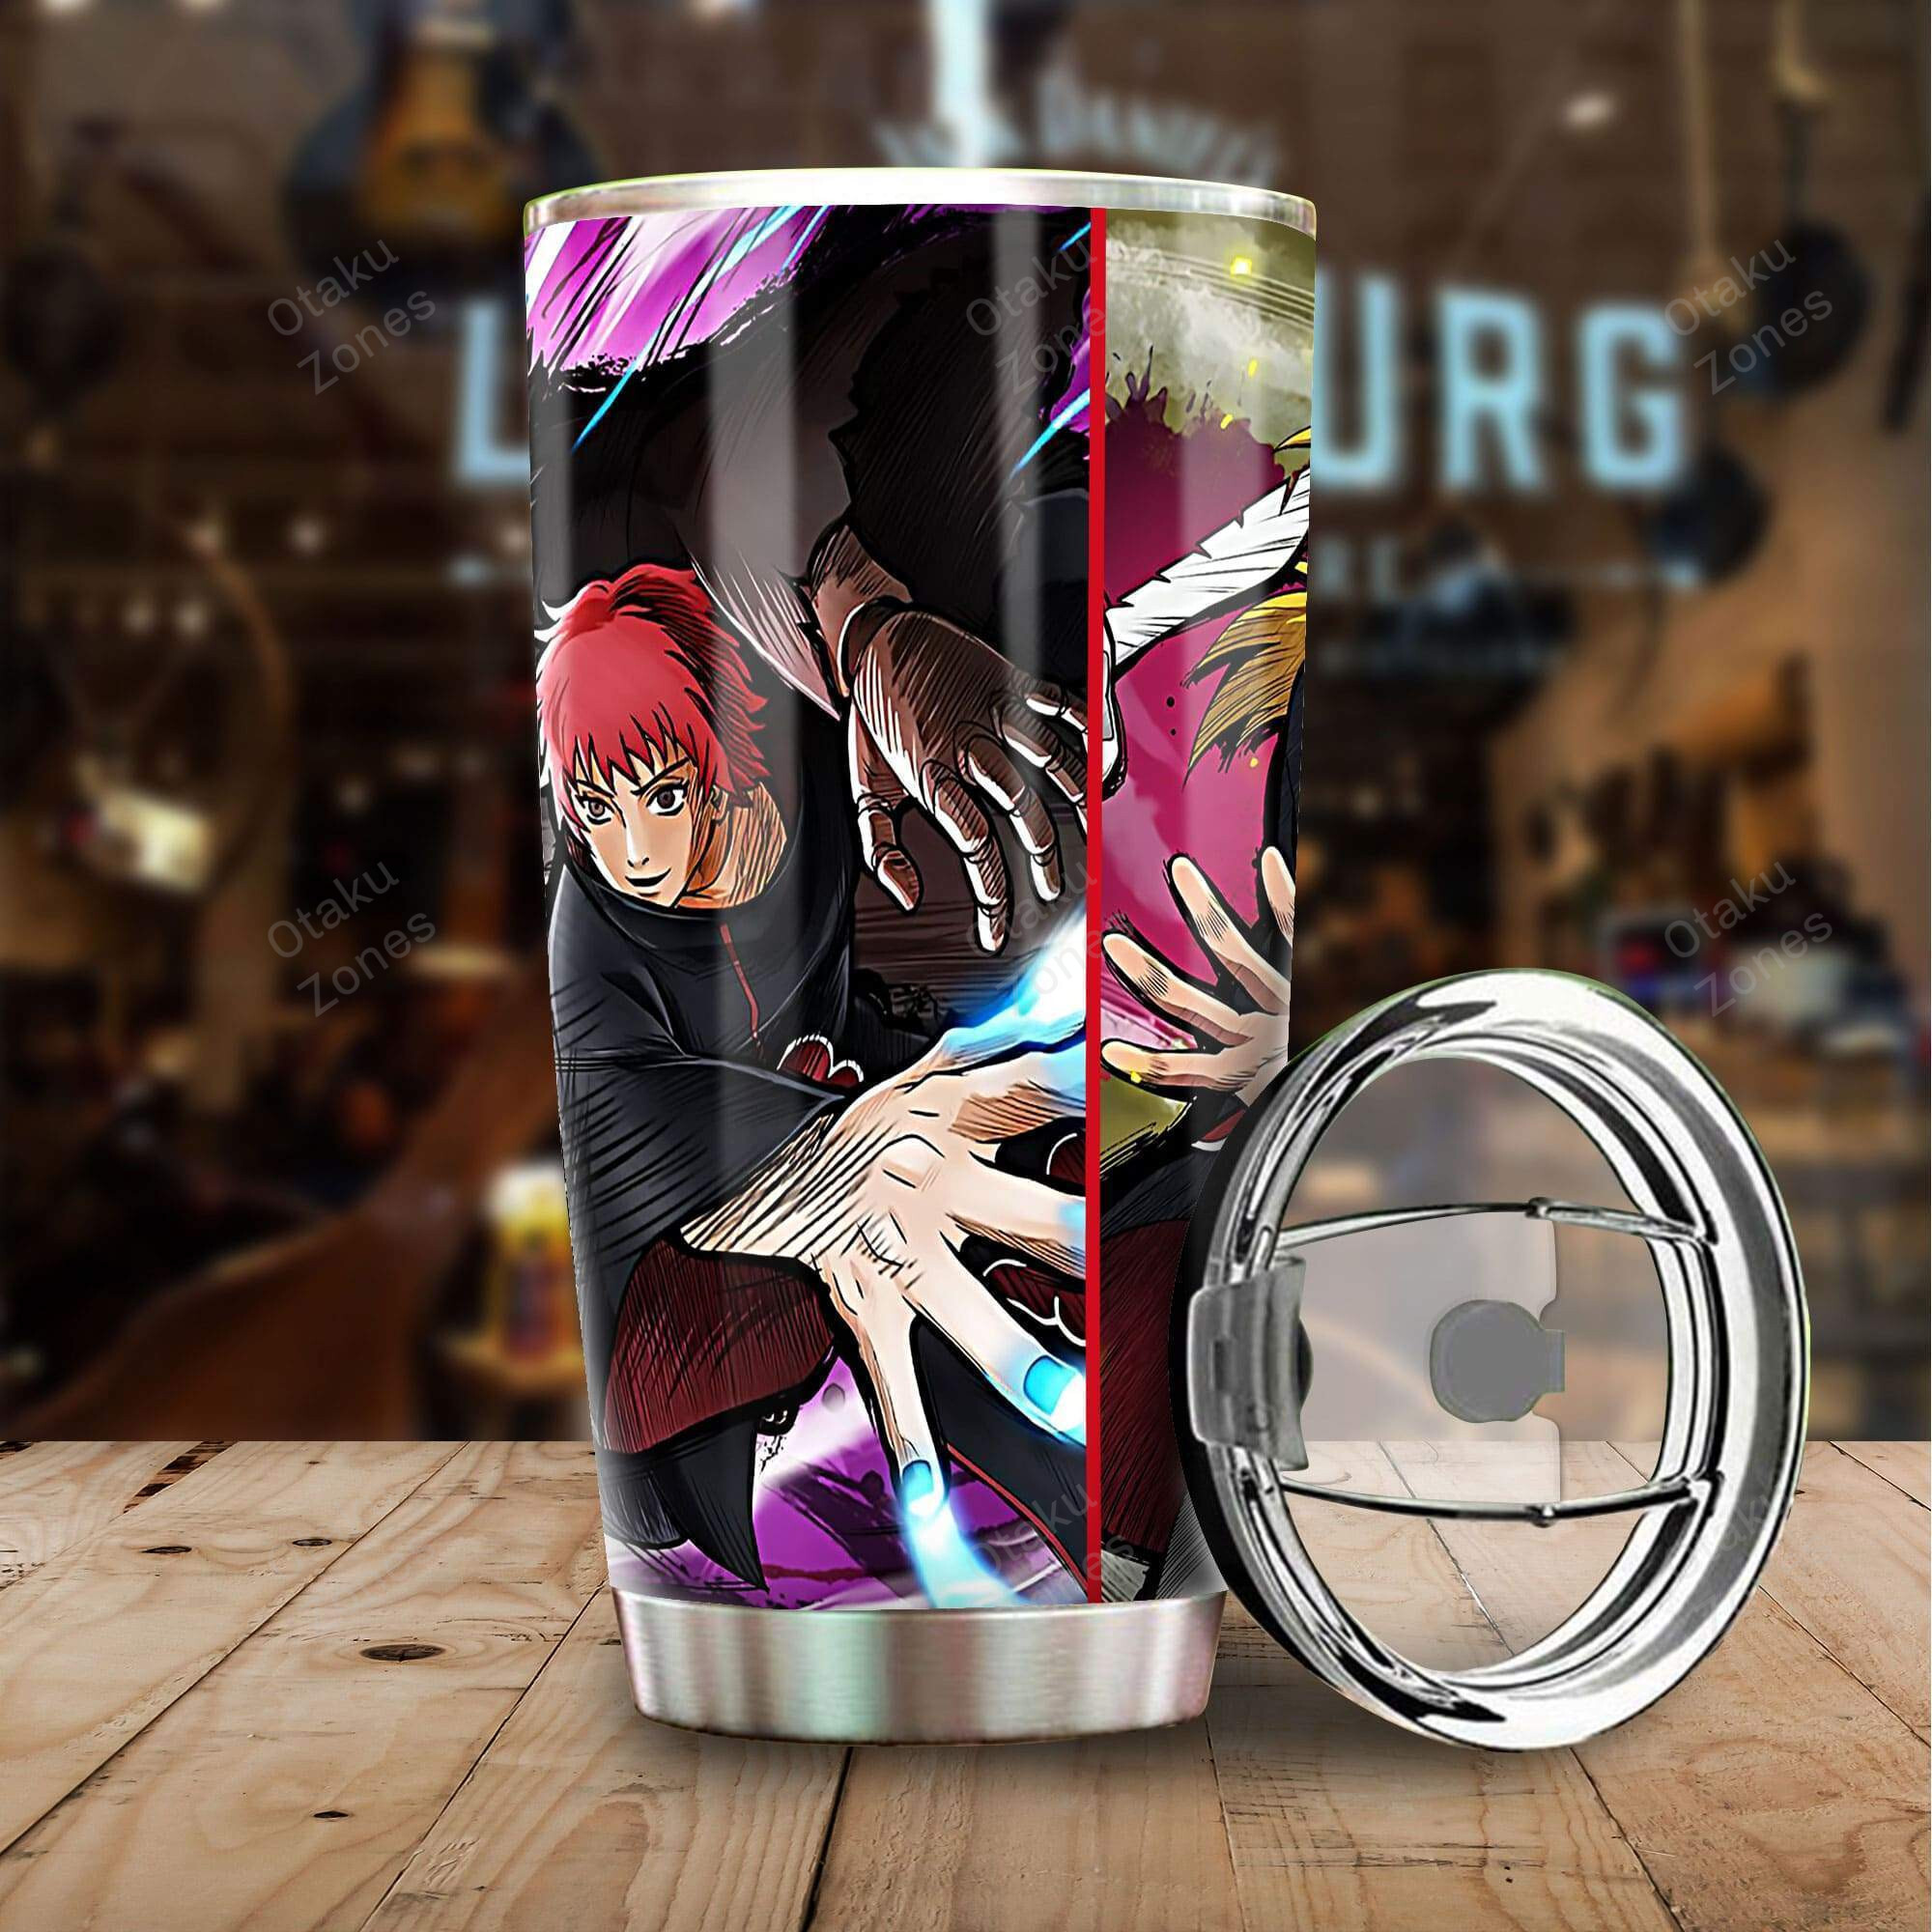 Go ahead and order your new tumbler now! 8